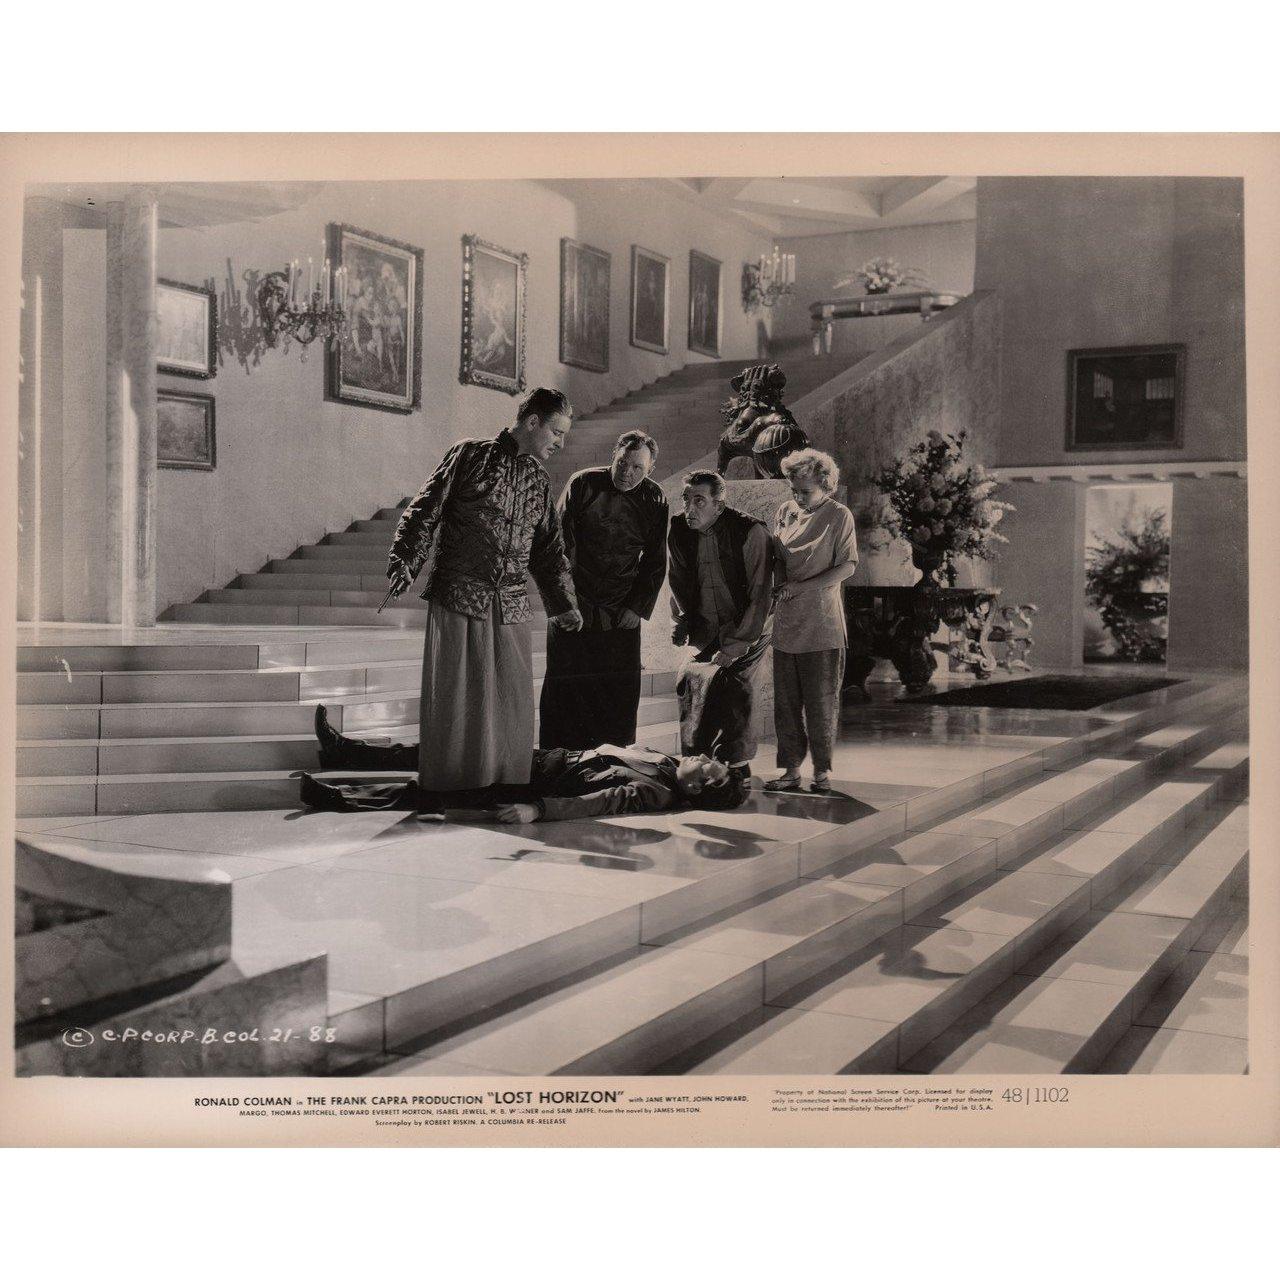 Original 1937 U.S. silver gelatin single-weight photo for the film Lost Horizon directed by Frank Capra with Ronald Colman / Jane Wyatt / Edward Everett Horton / John Howard. Fine condition. Please note: the size is stated in inches and the actual